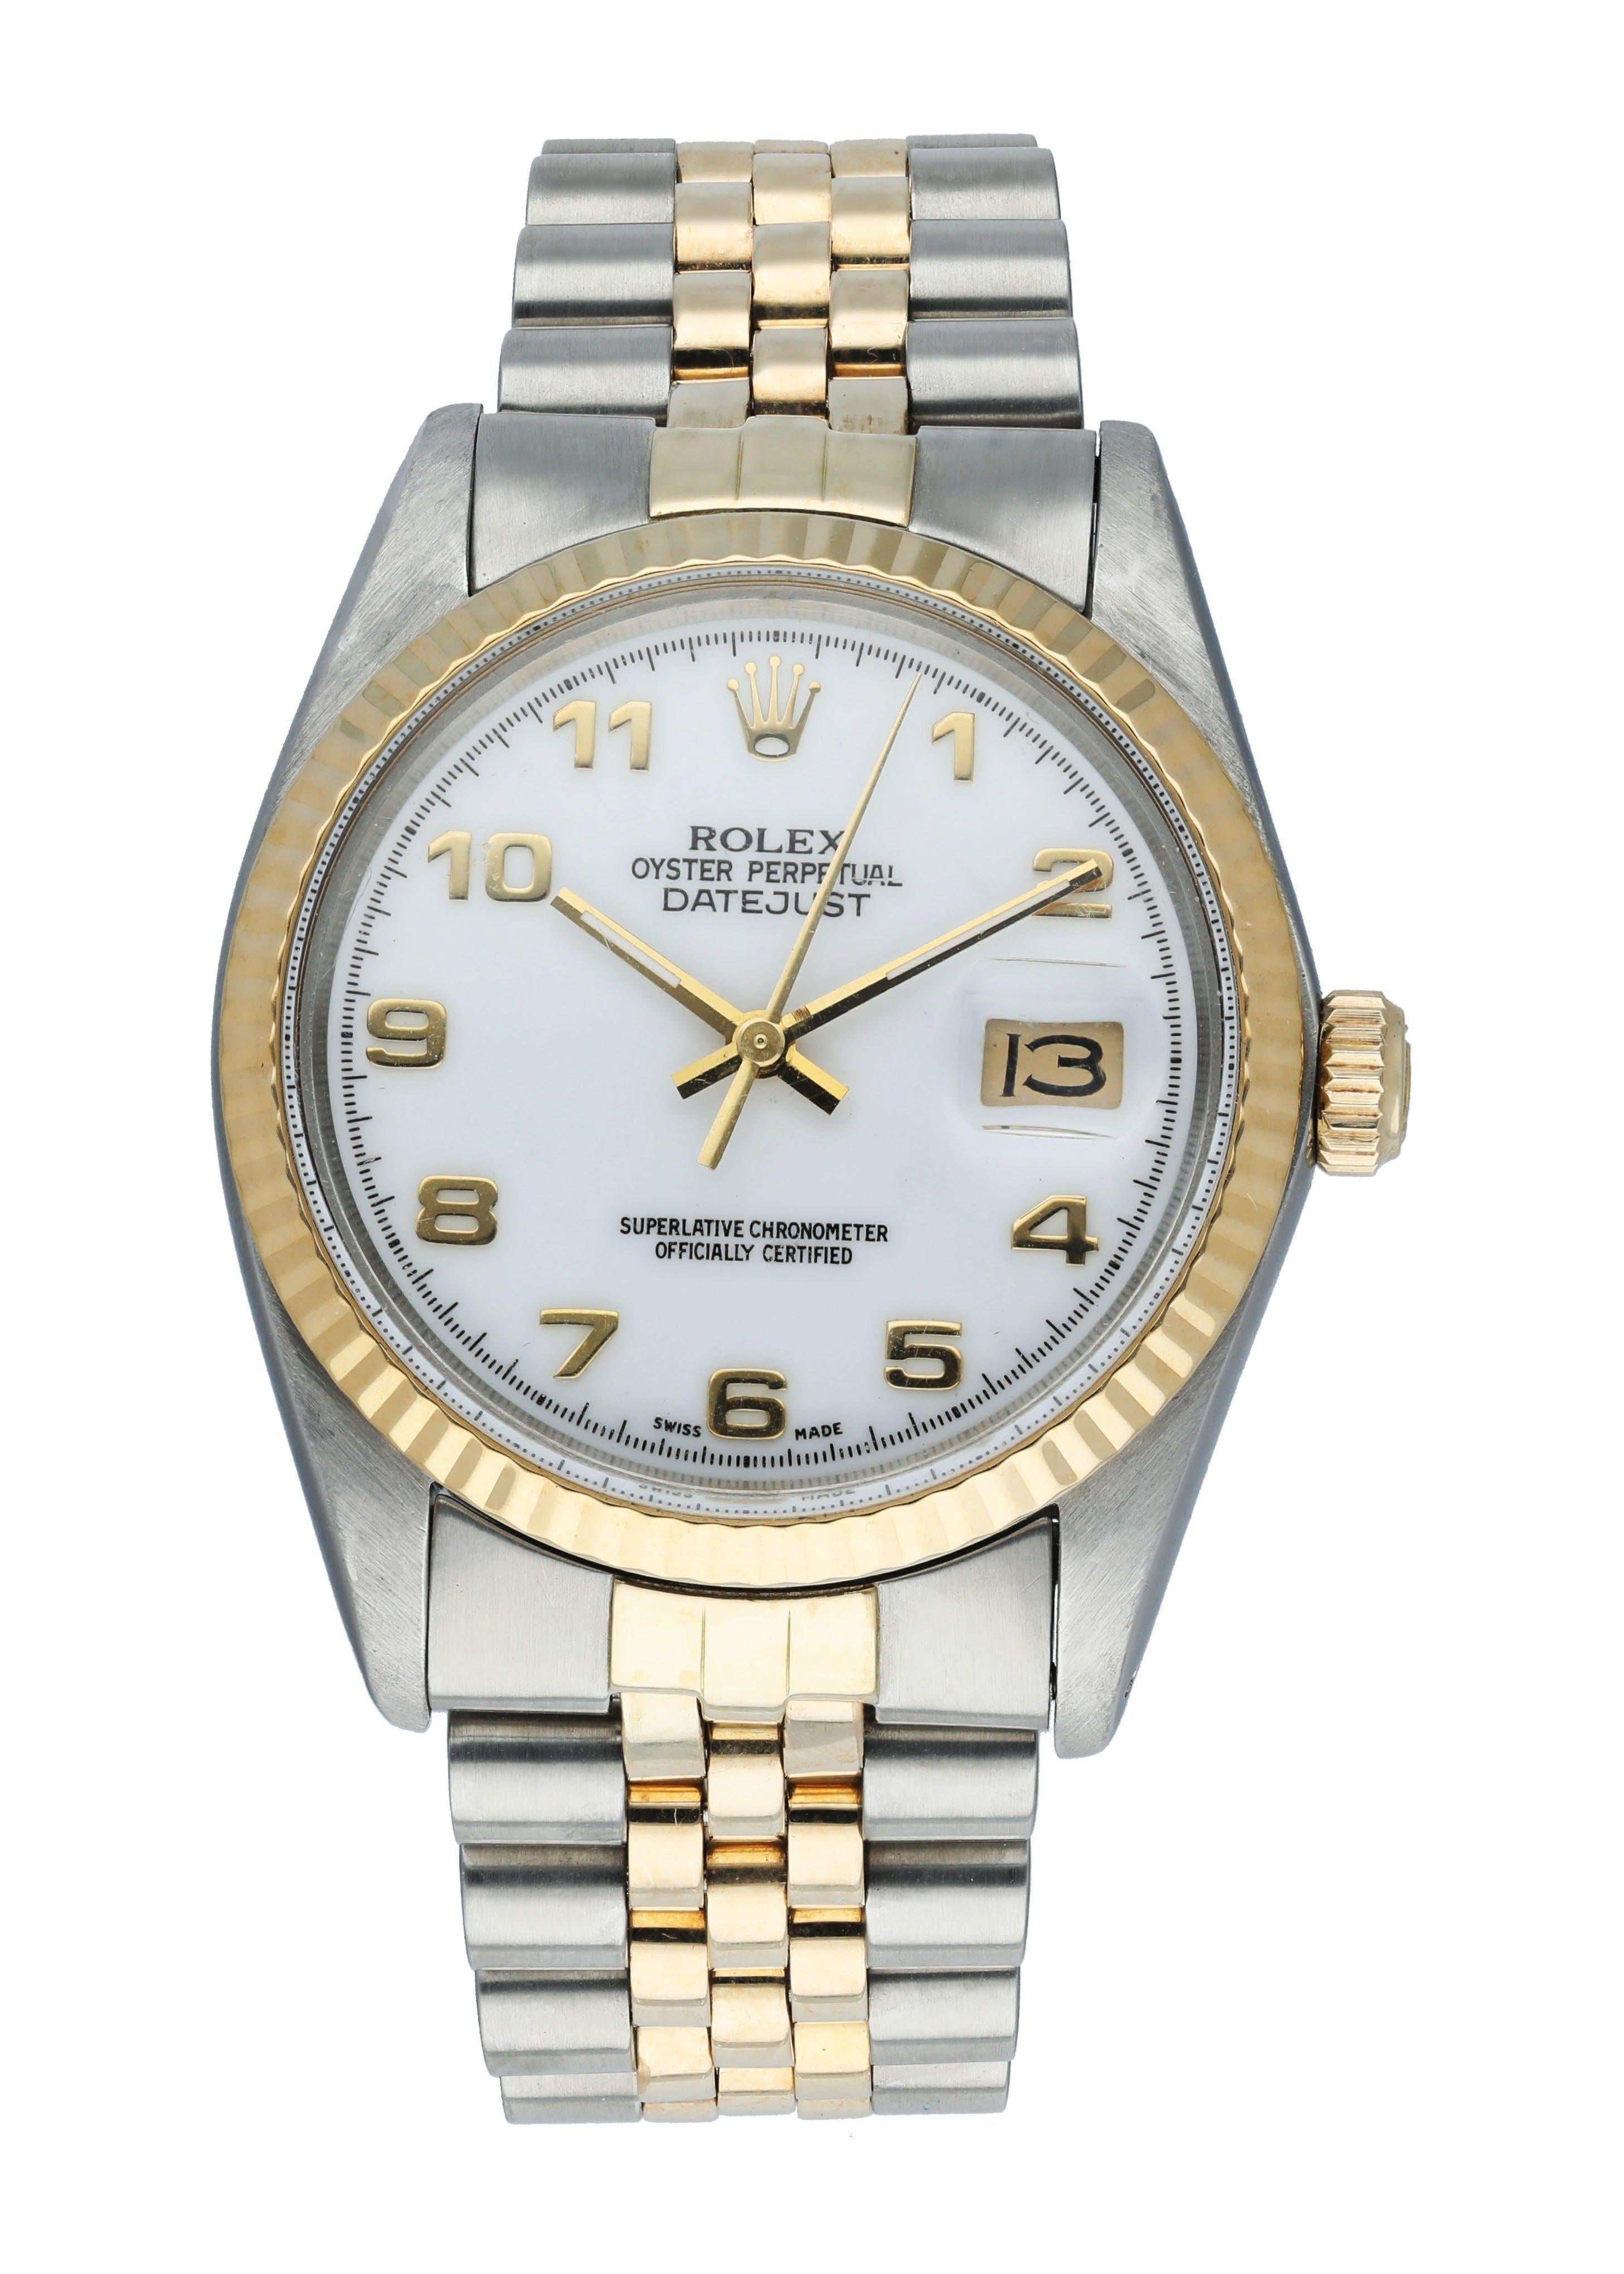 Rolex Datejust 16013 Men's Watch. 
36mm Stainless Steel case. 
Yellow Gold fluted bezel. 
White dial with gold hands and Arabic numeral hour markers. 
Minute markers on the outer dial. 
Date display at the 3 o'clock position. 
Two Tone Stainless